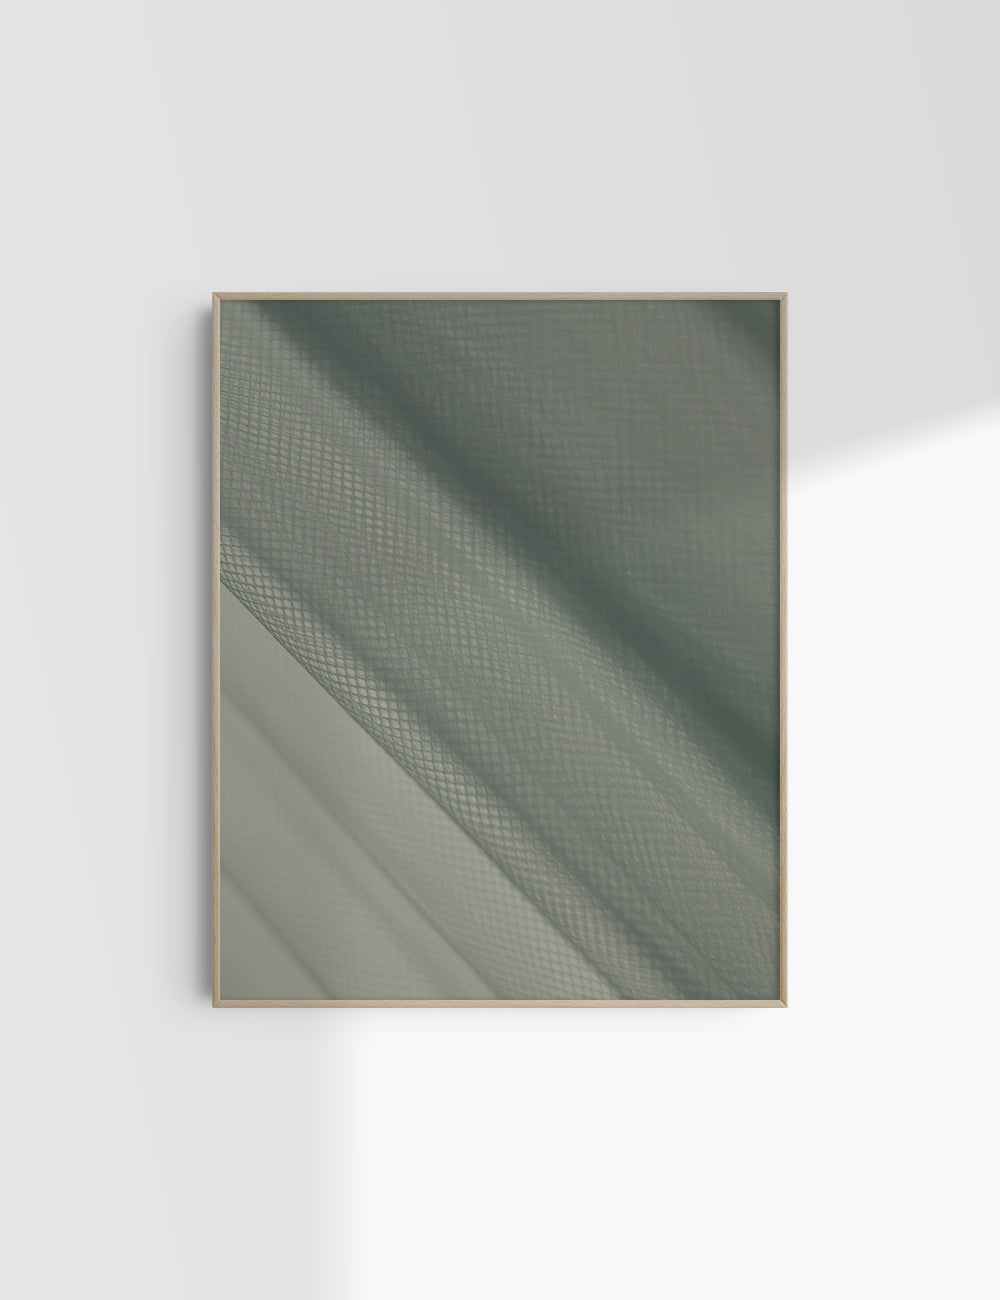 Abstract minimalist photography 2.1 Green aesthetic. Printable wall art photography. PAPER MOON Art & Design